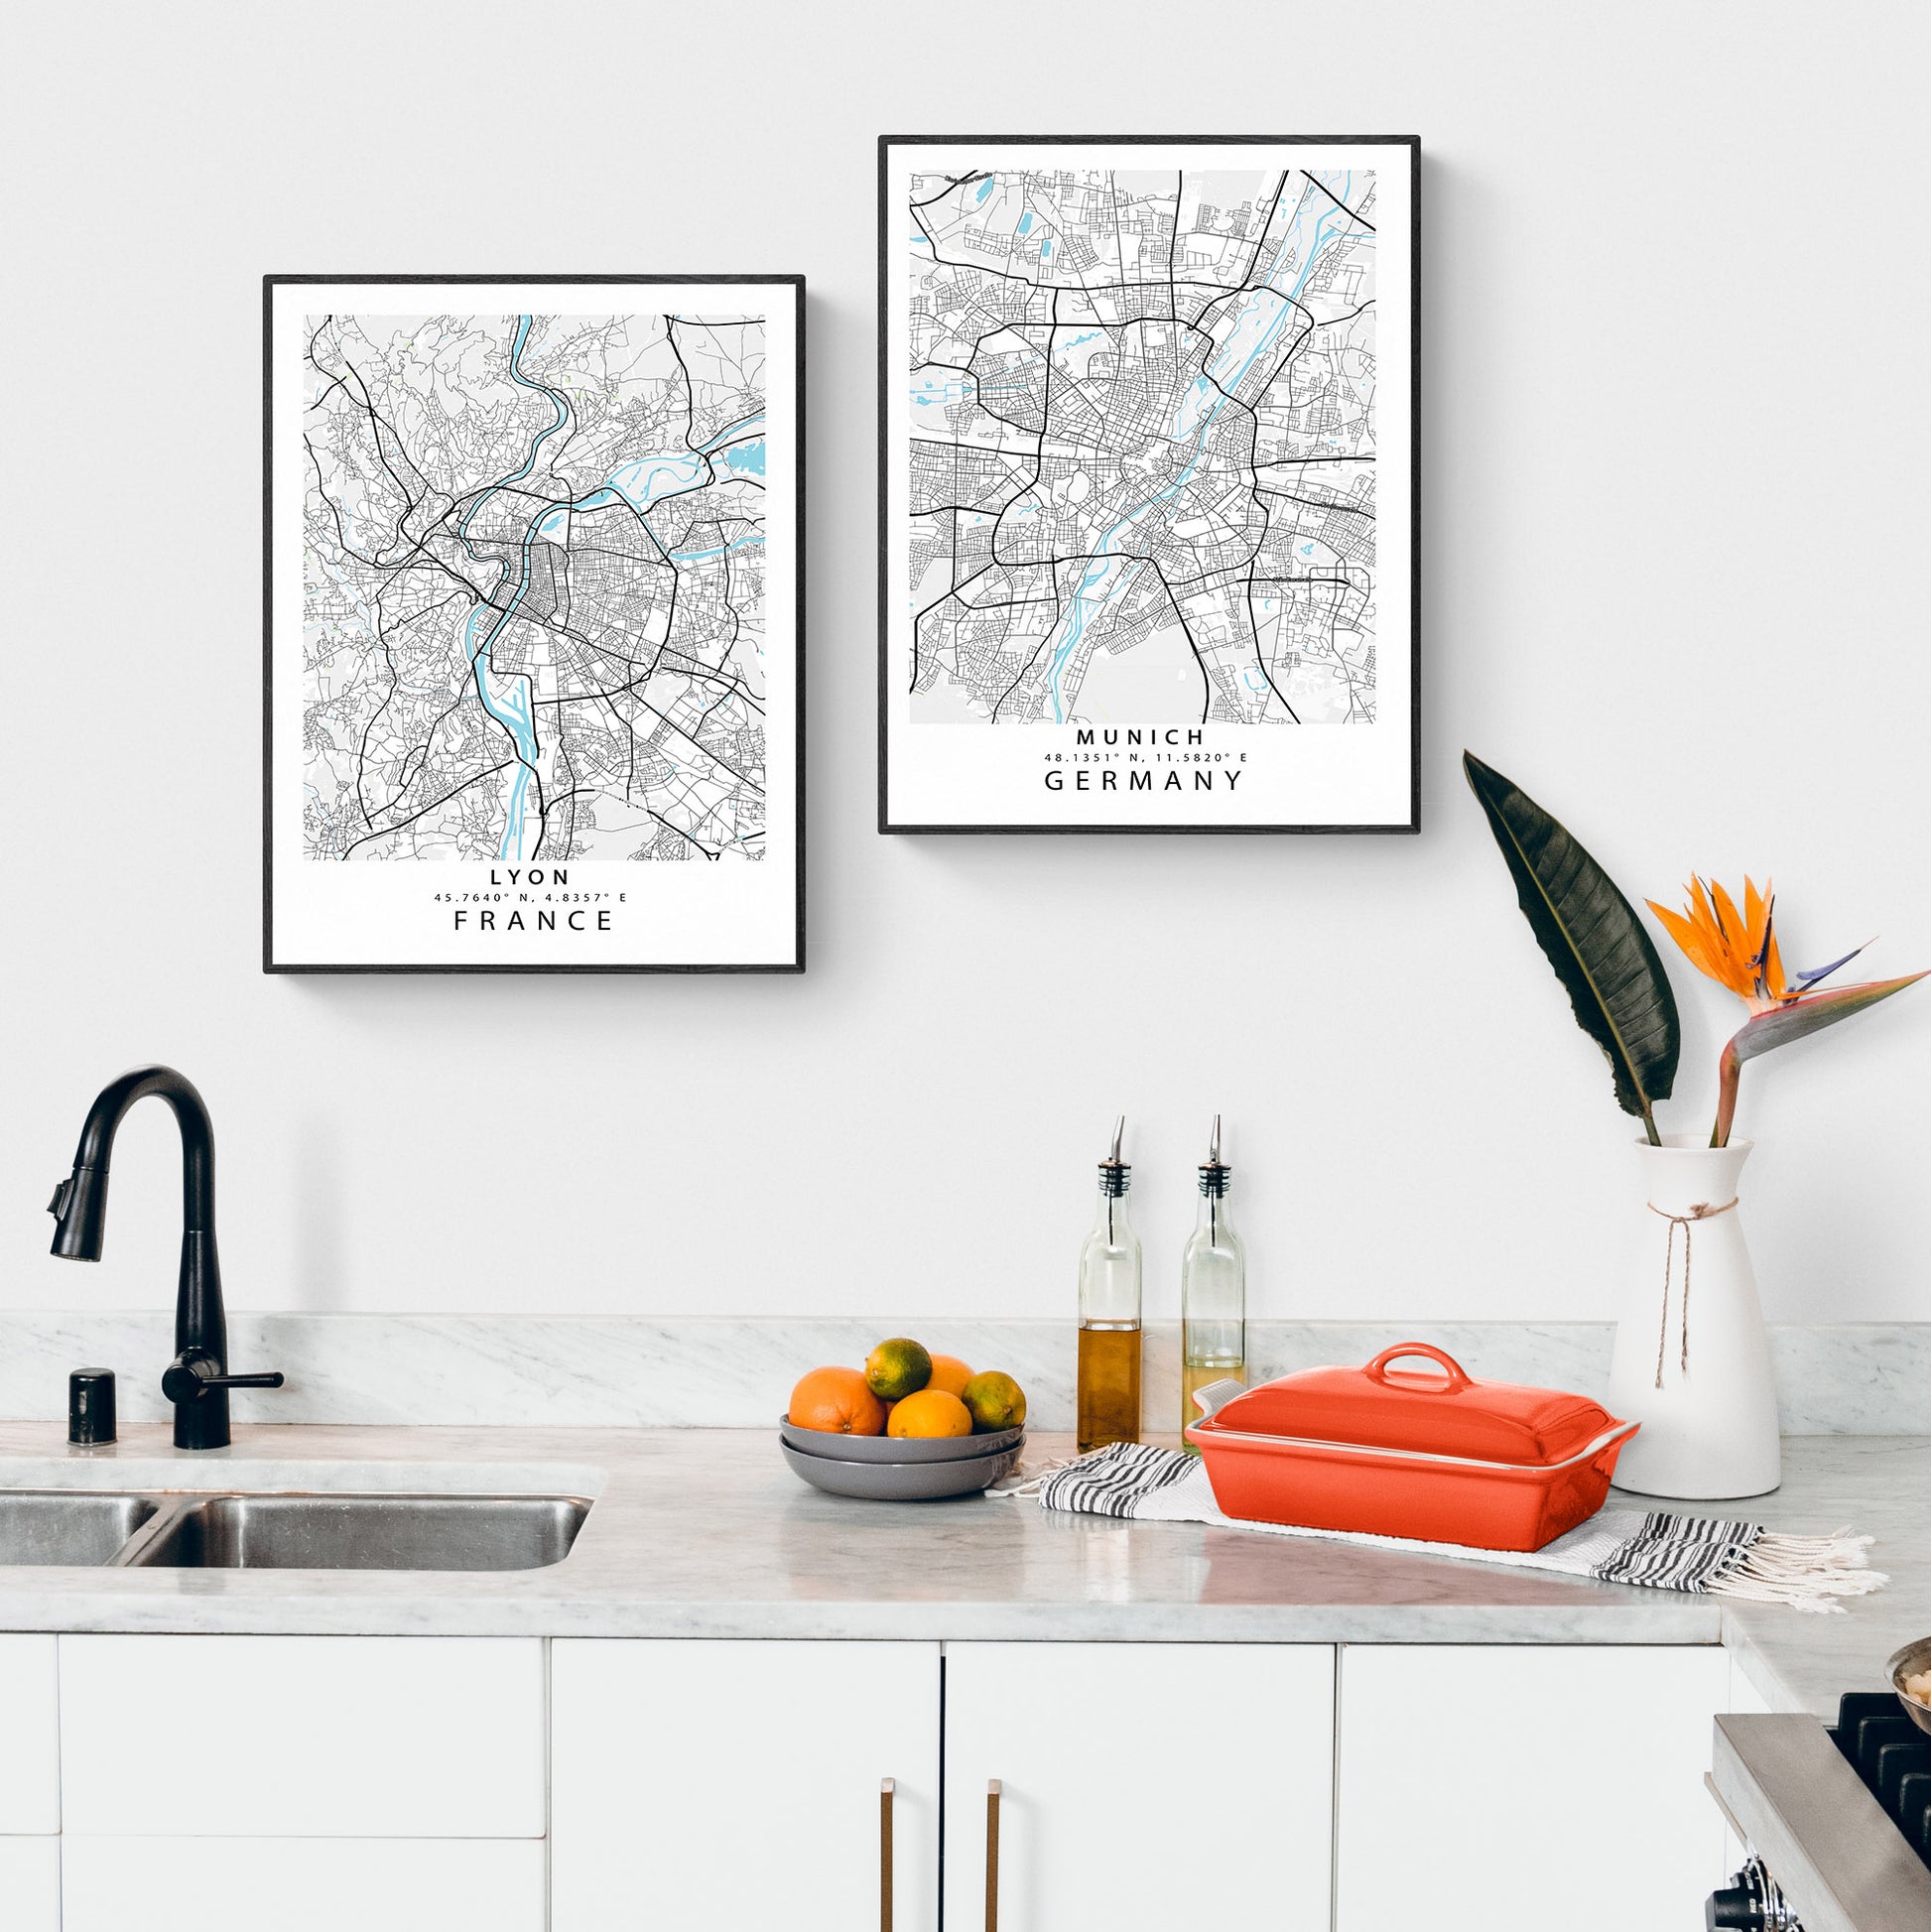 Say goodbye to boring walls and hello to Custom Map Art Prints! Our Lyon Street Map Posters can make your pad pop with beautiful streetmap posters of your favorite cities. From custom street map posters to posters and prints with maps, you'll get a good lookin' view of Lyon! (Plus, it'll be a real treat for your guests!)